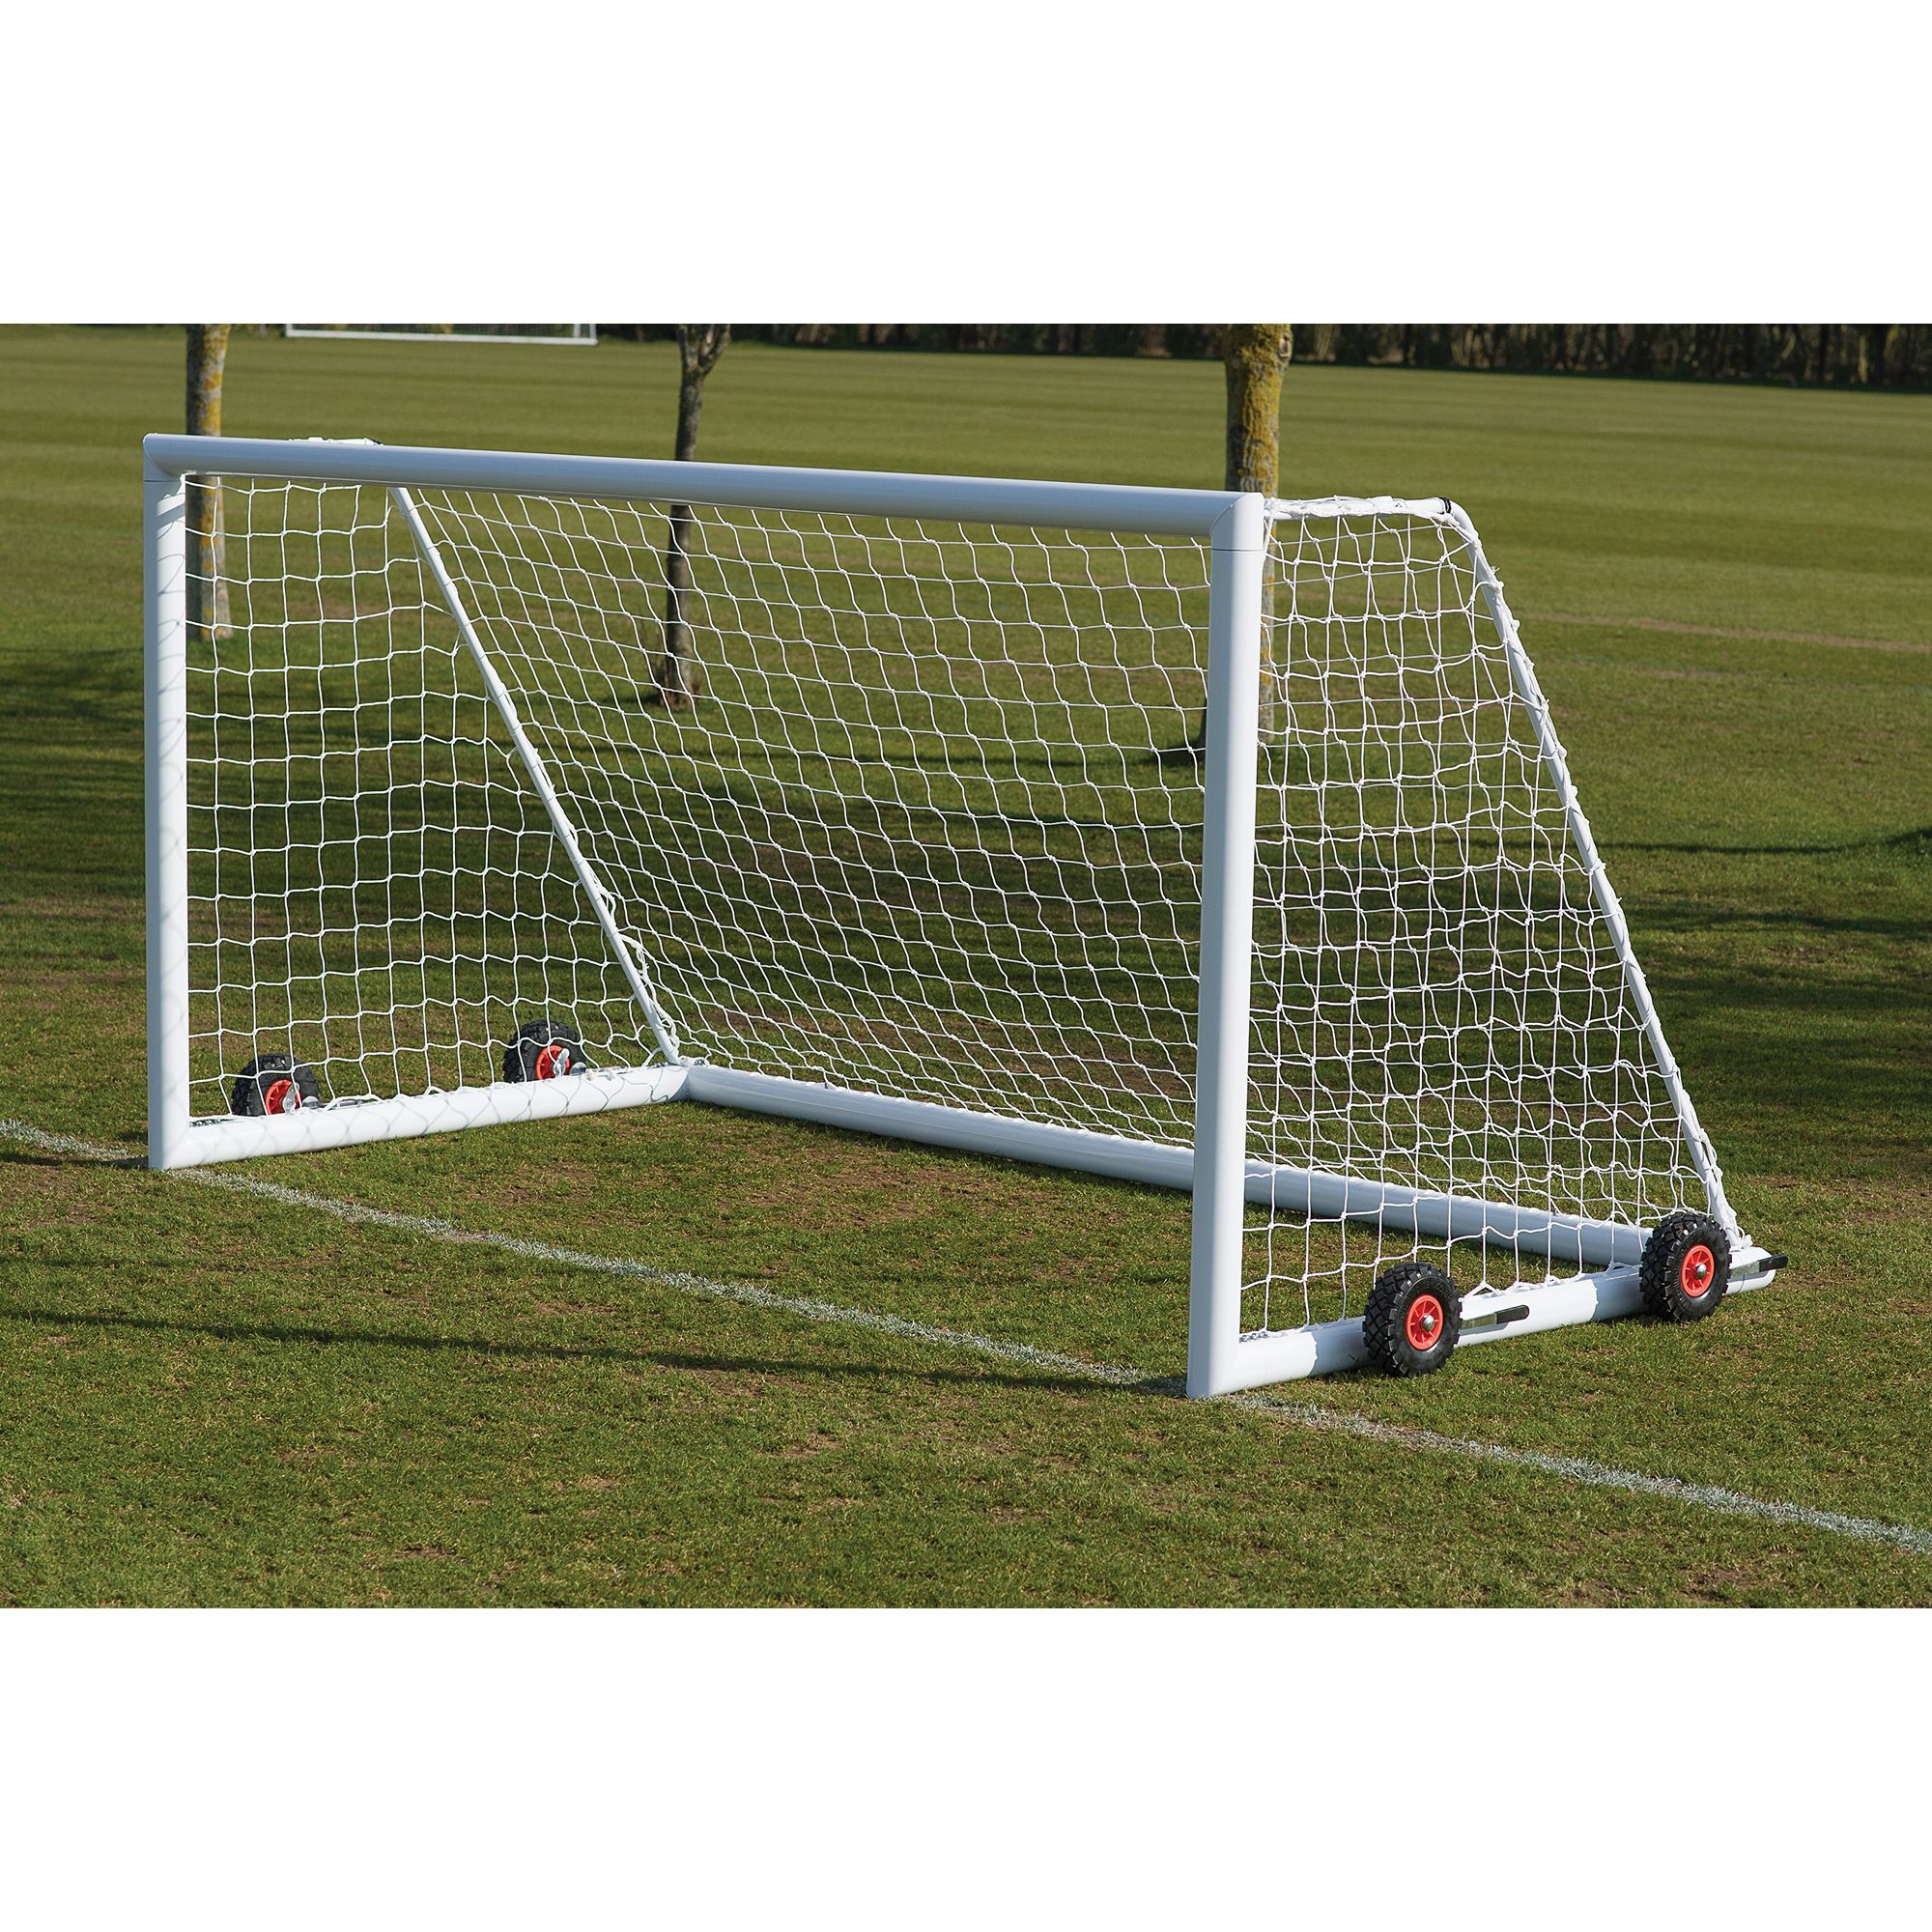 3g Weighted Portagoal Mini Soccer Pair